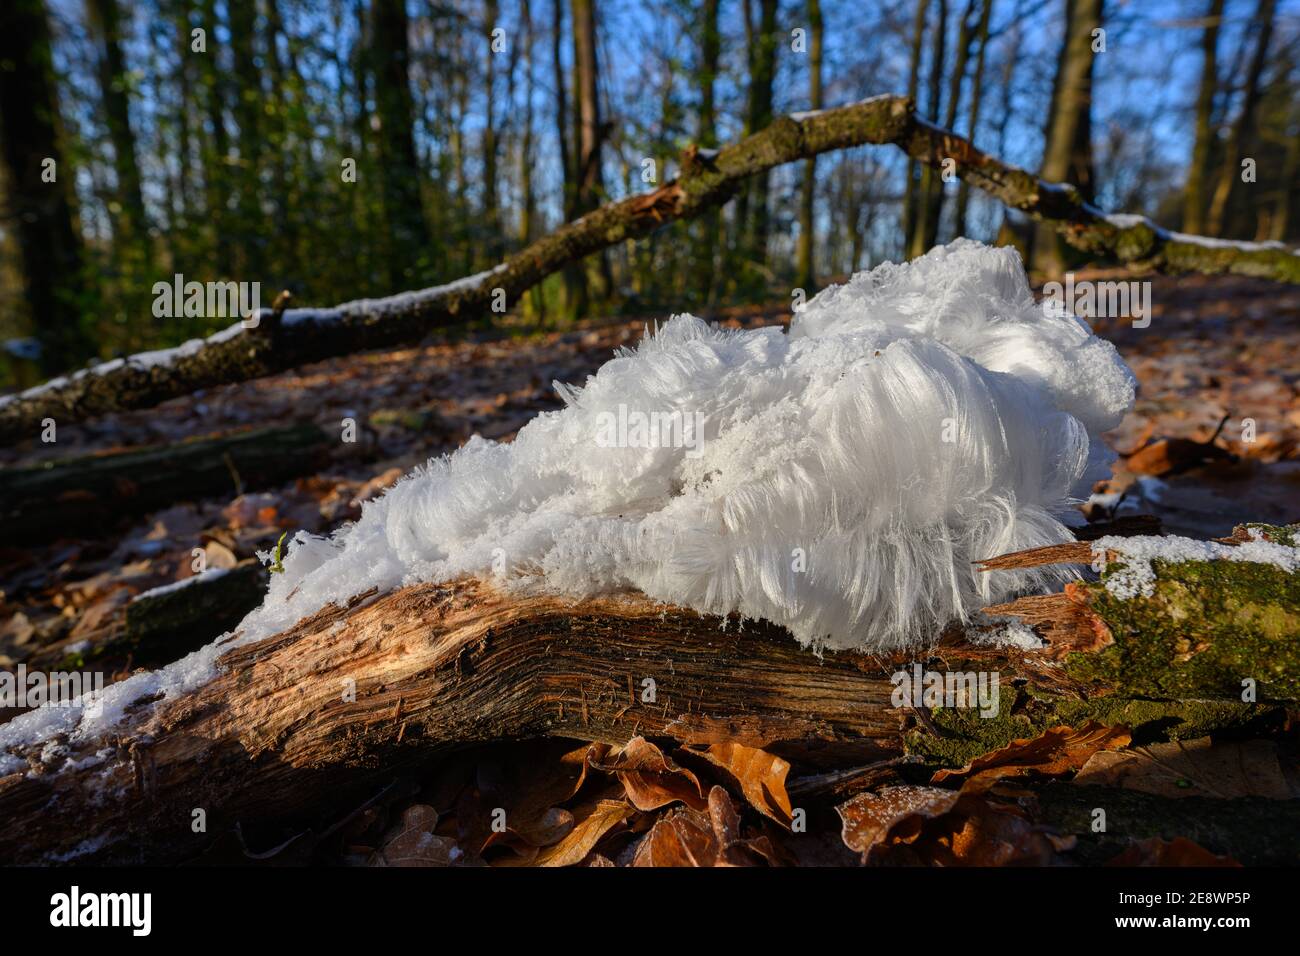 Hair ice, Ice hair on wood, hairy ice look like white hair, fine ice structures, stringy filamentous ice structures Stock Photo